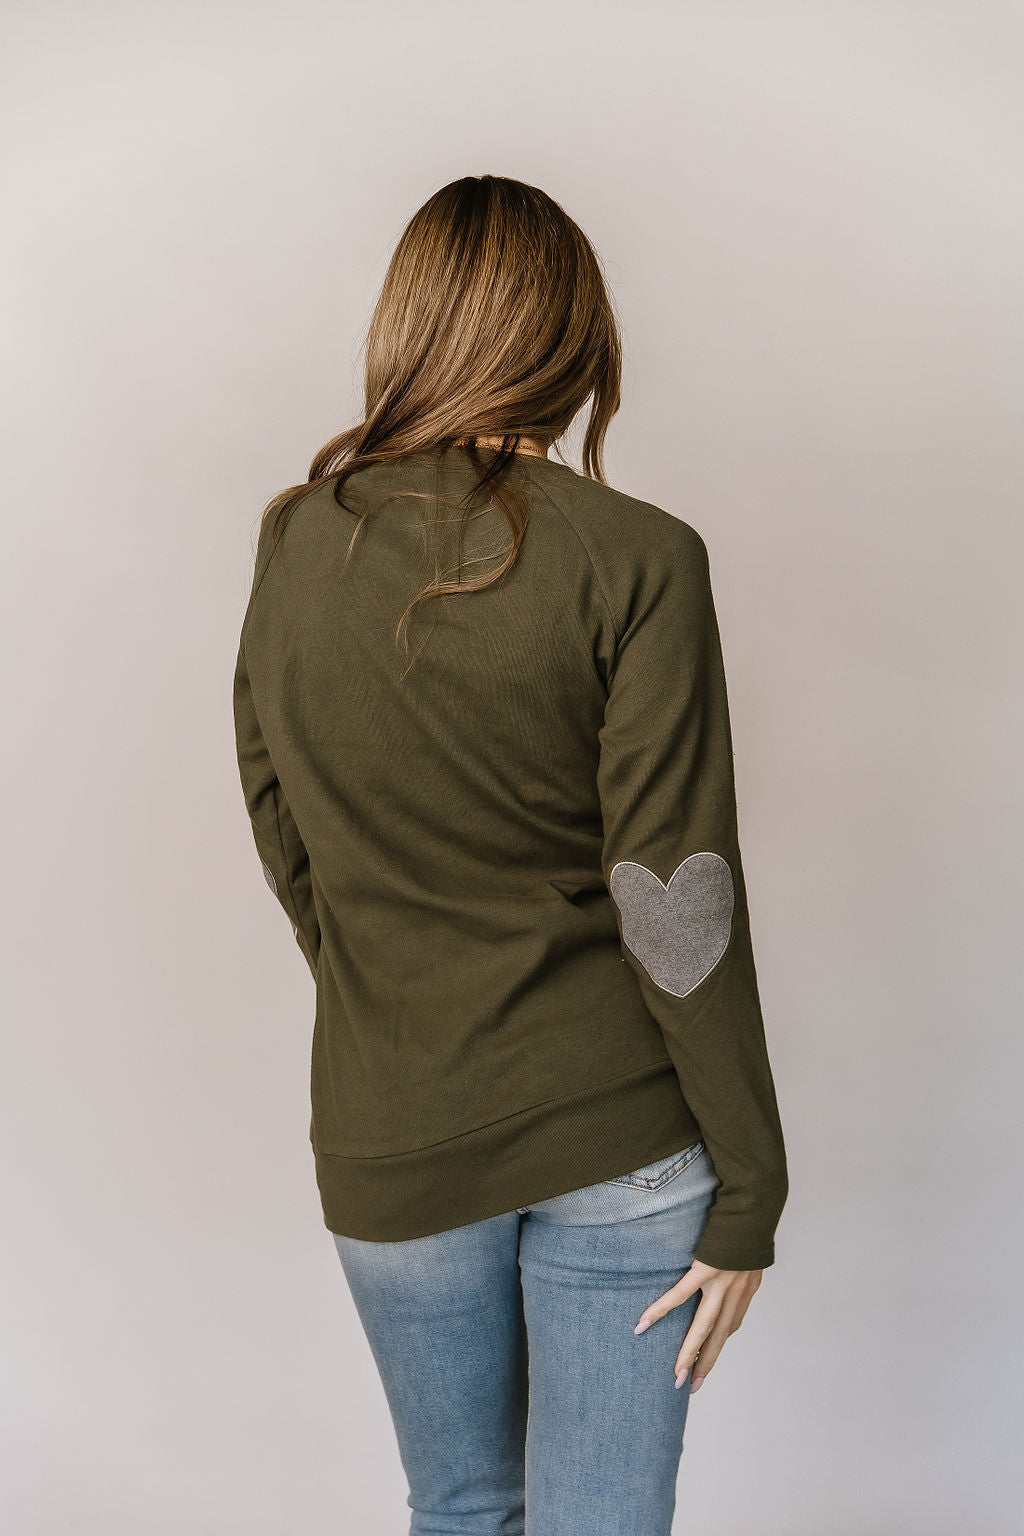 Ampersand Avenue Side Zip Pullover Follow Your Heart